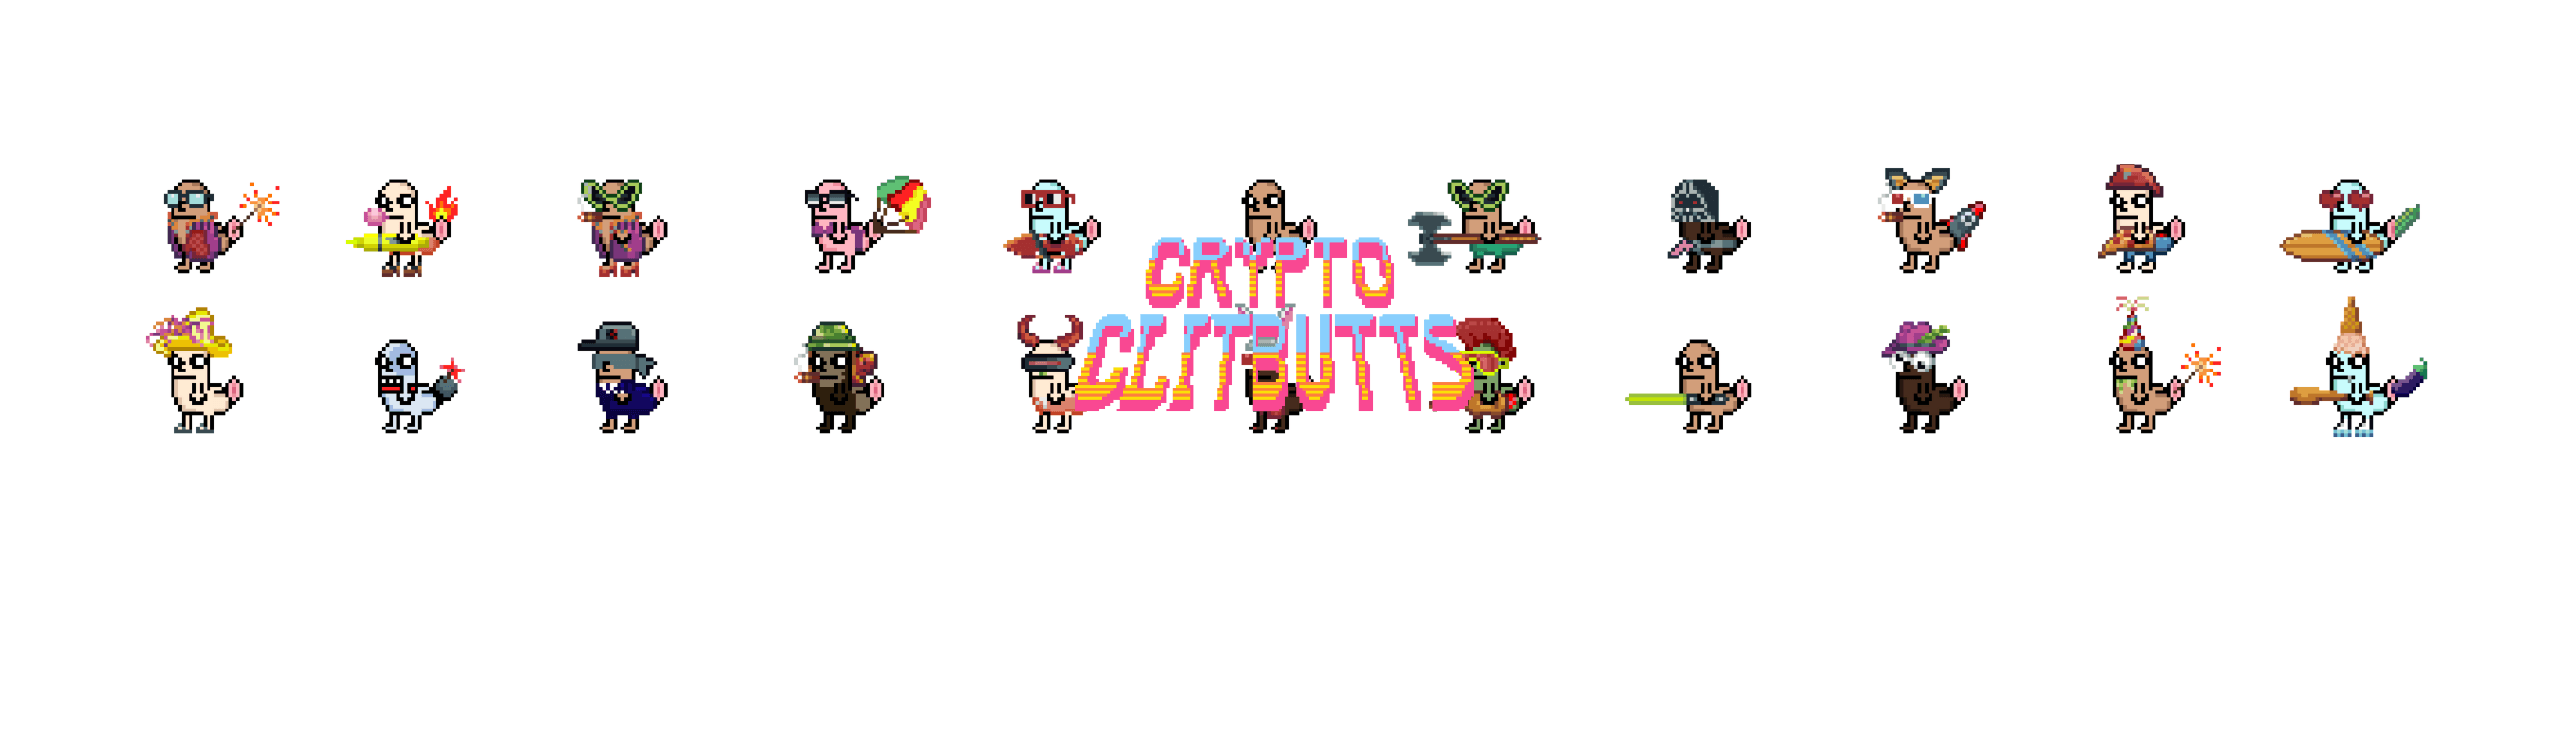 CryptoClitbutts